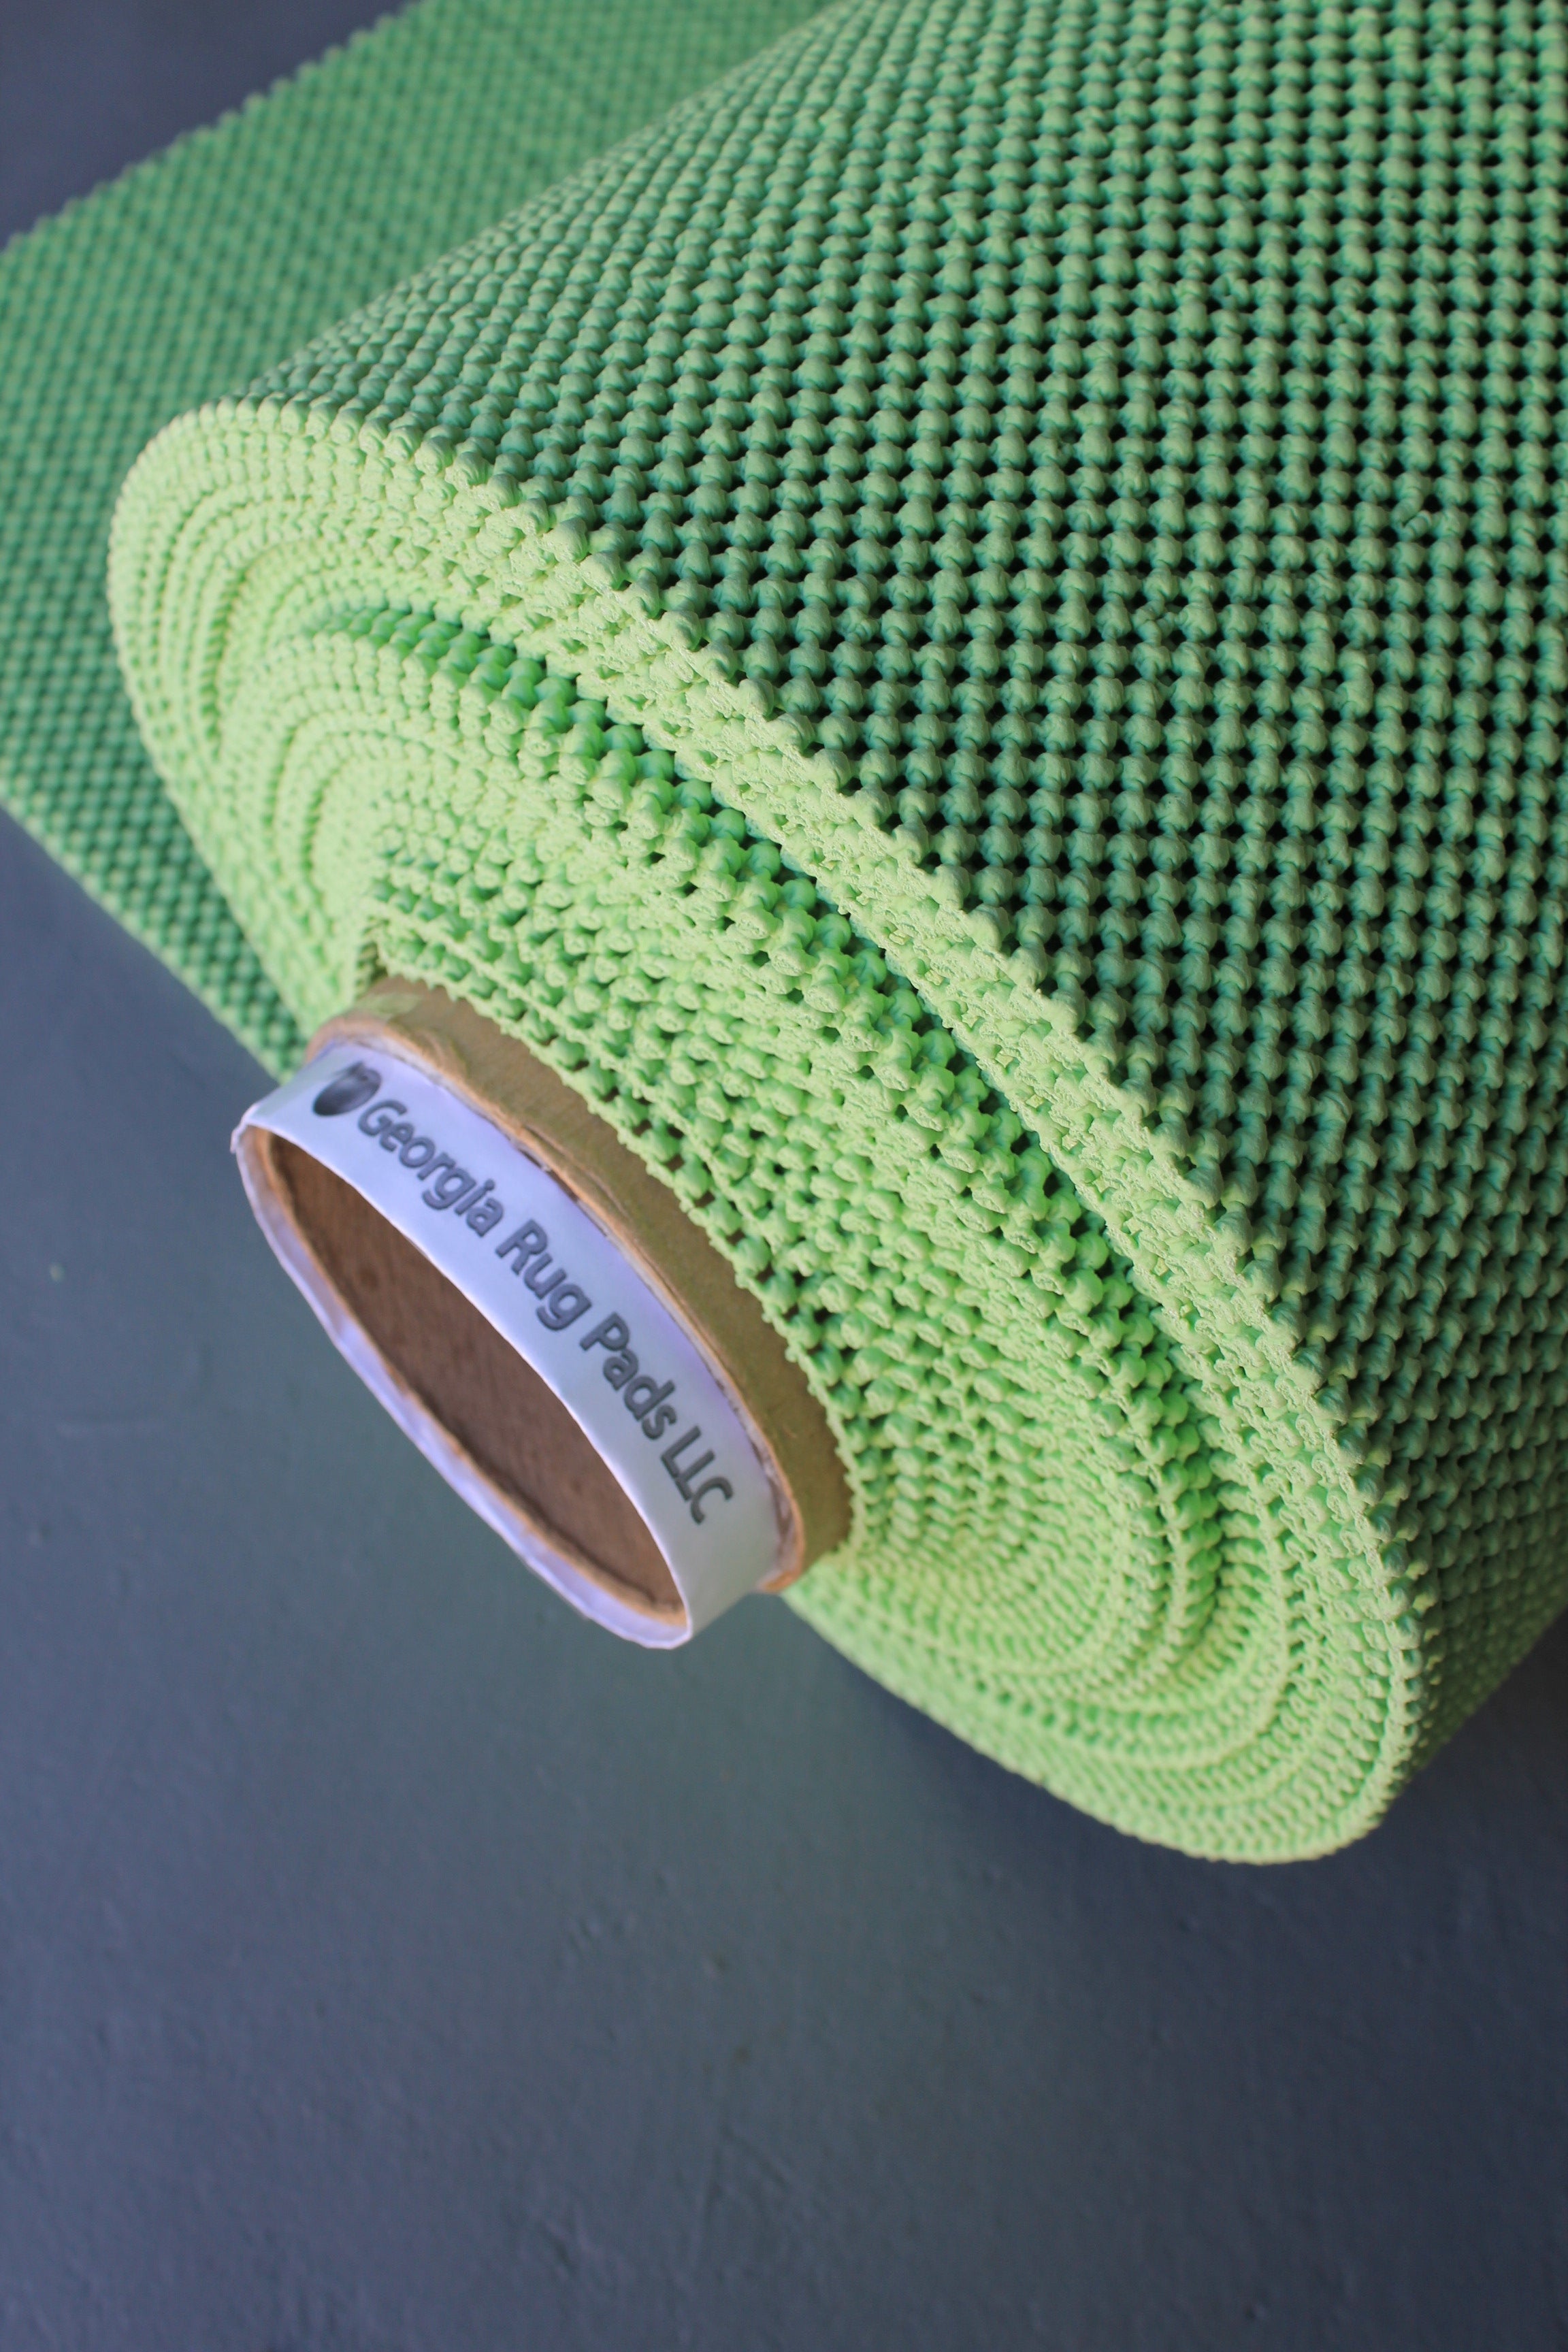 Rolls of Super Green Natural Rubber Rug pad for Hard Floors